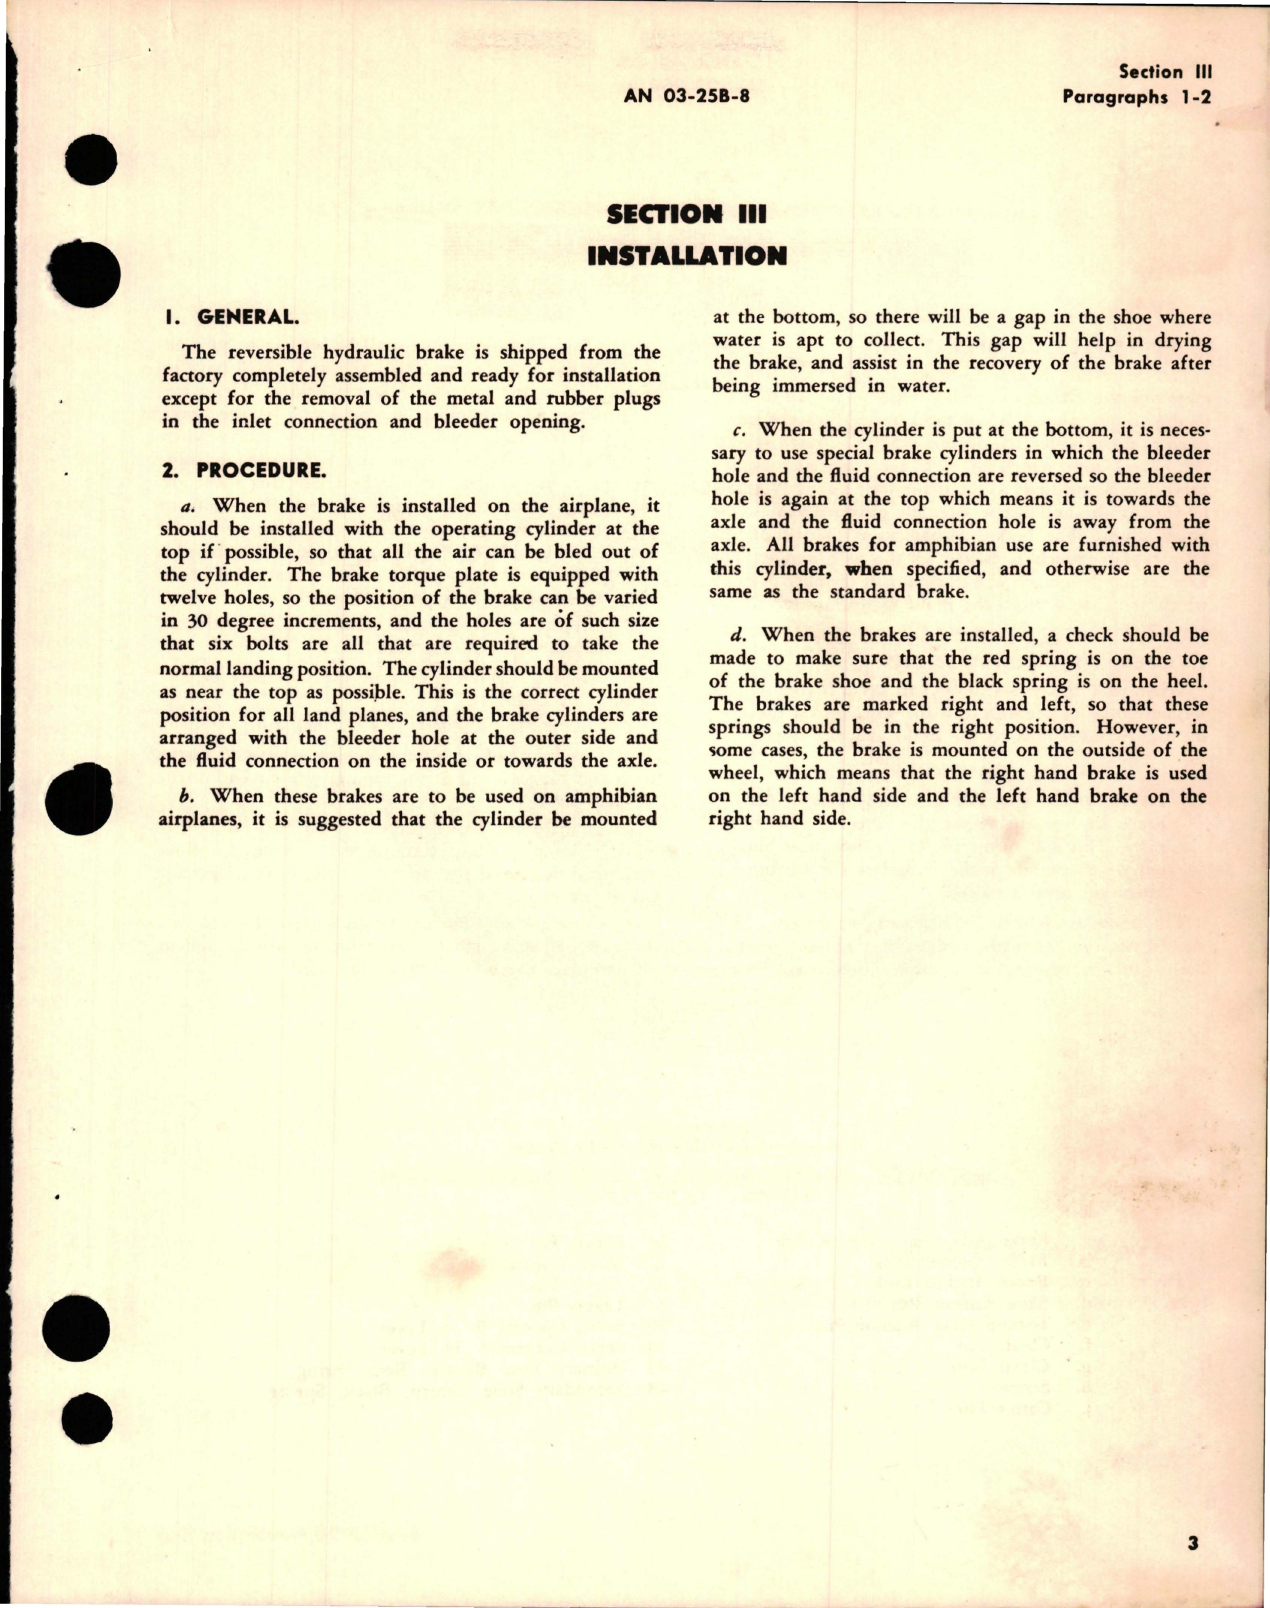 Sample page 9 from AirCorps Library document: Operation, Service, Overhaul Instructions with Parts Catalog for Reversible Hydraulic Brakes